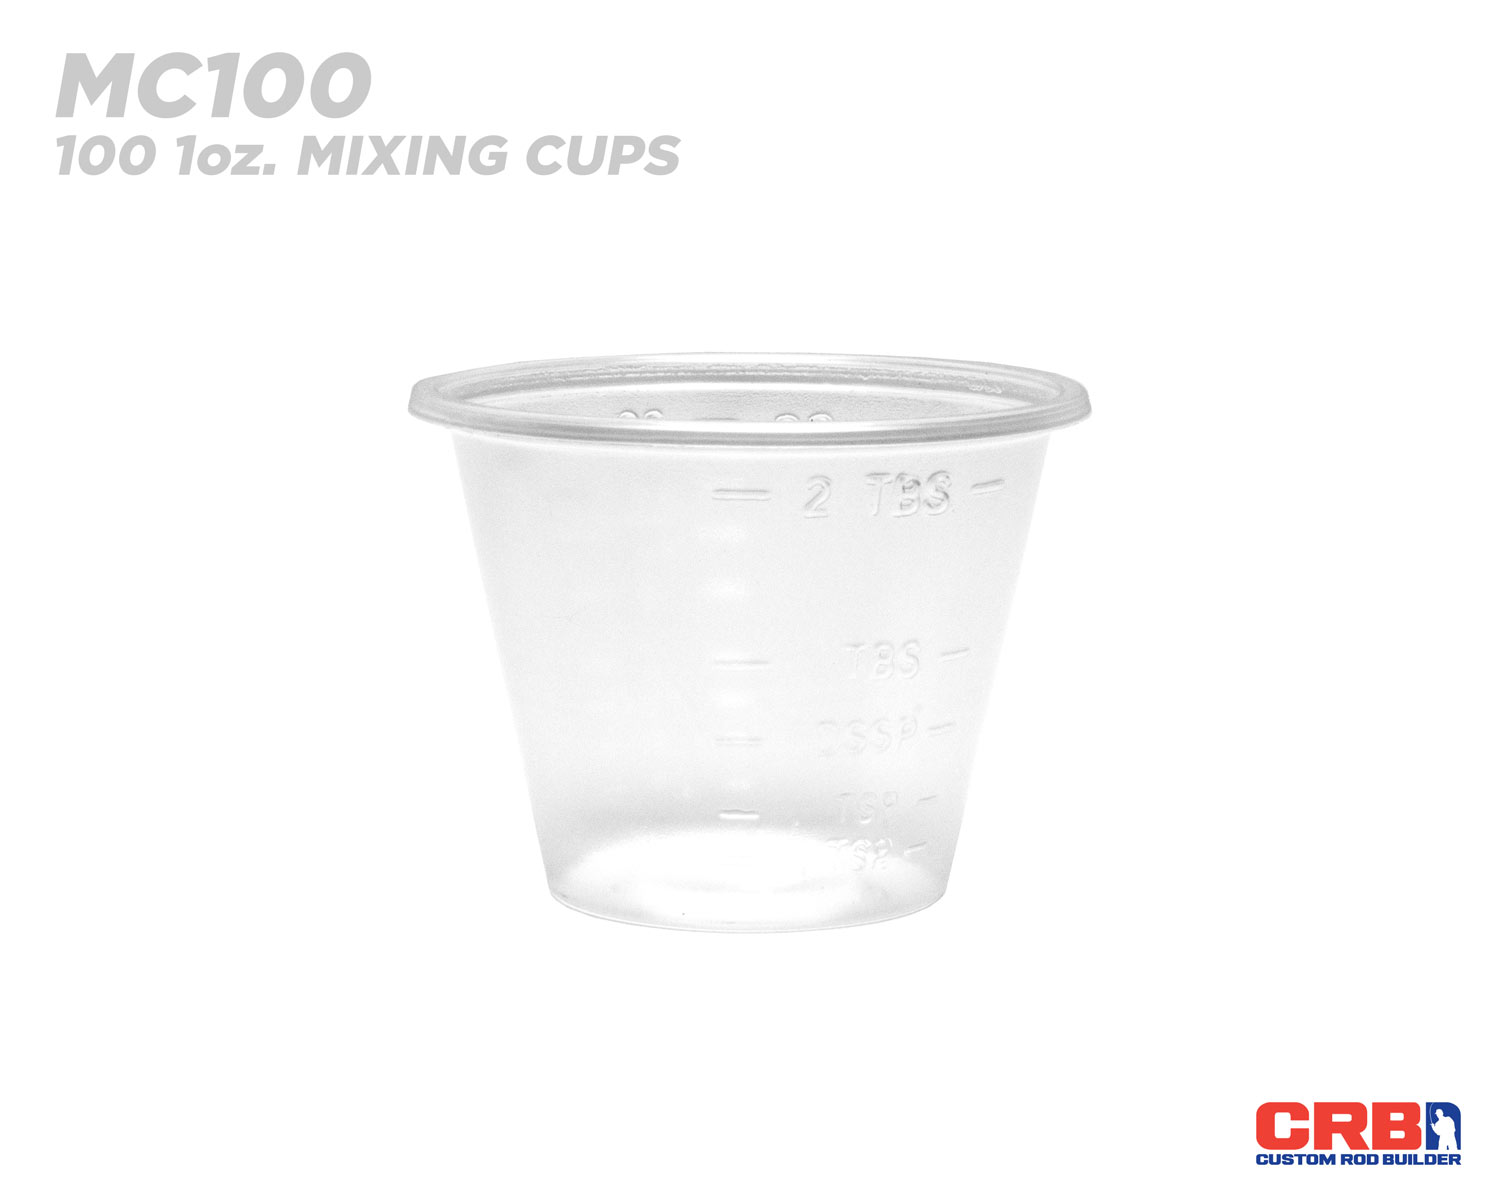 1 Oz plastic mixing cups. Use these for mixing 2 part epoxy for the finish on a rod. Sold in sleeves of 100 cups.